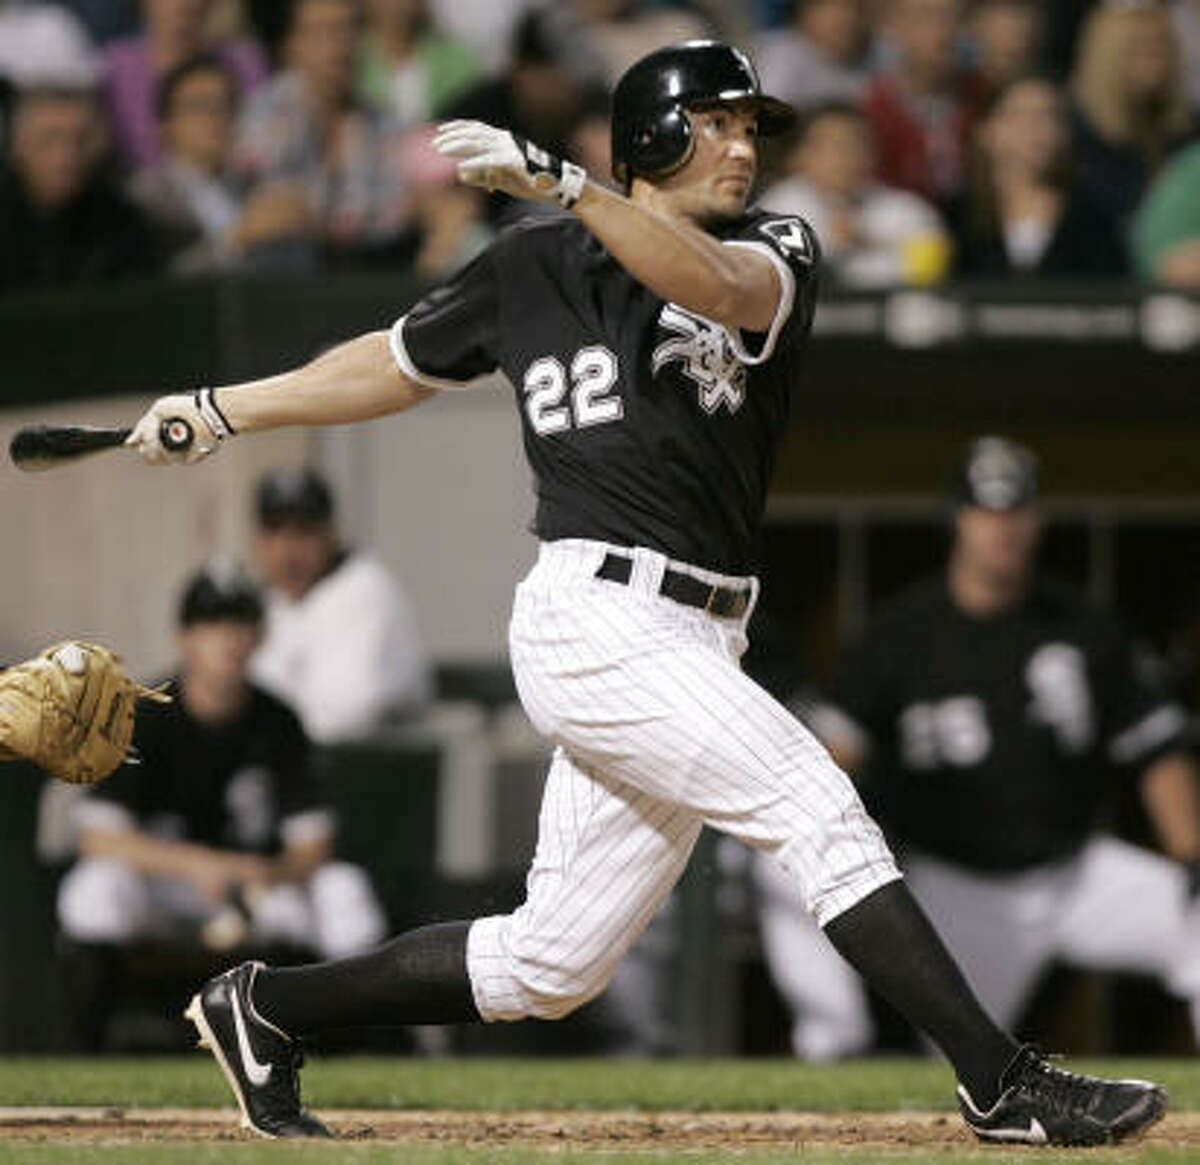 White Sox's Scott Podsednik connected on a grand slam in the fourth inning.